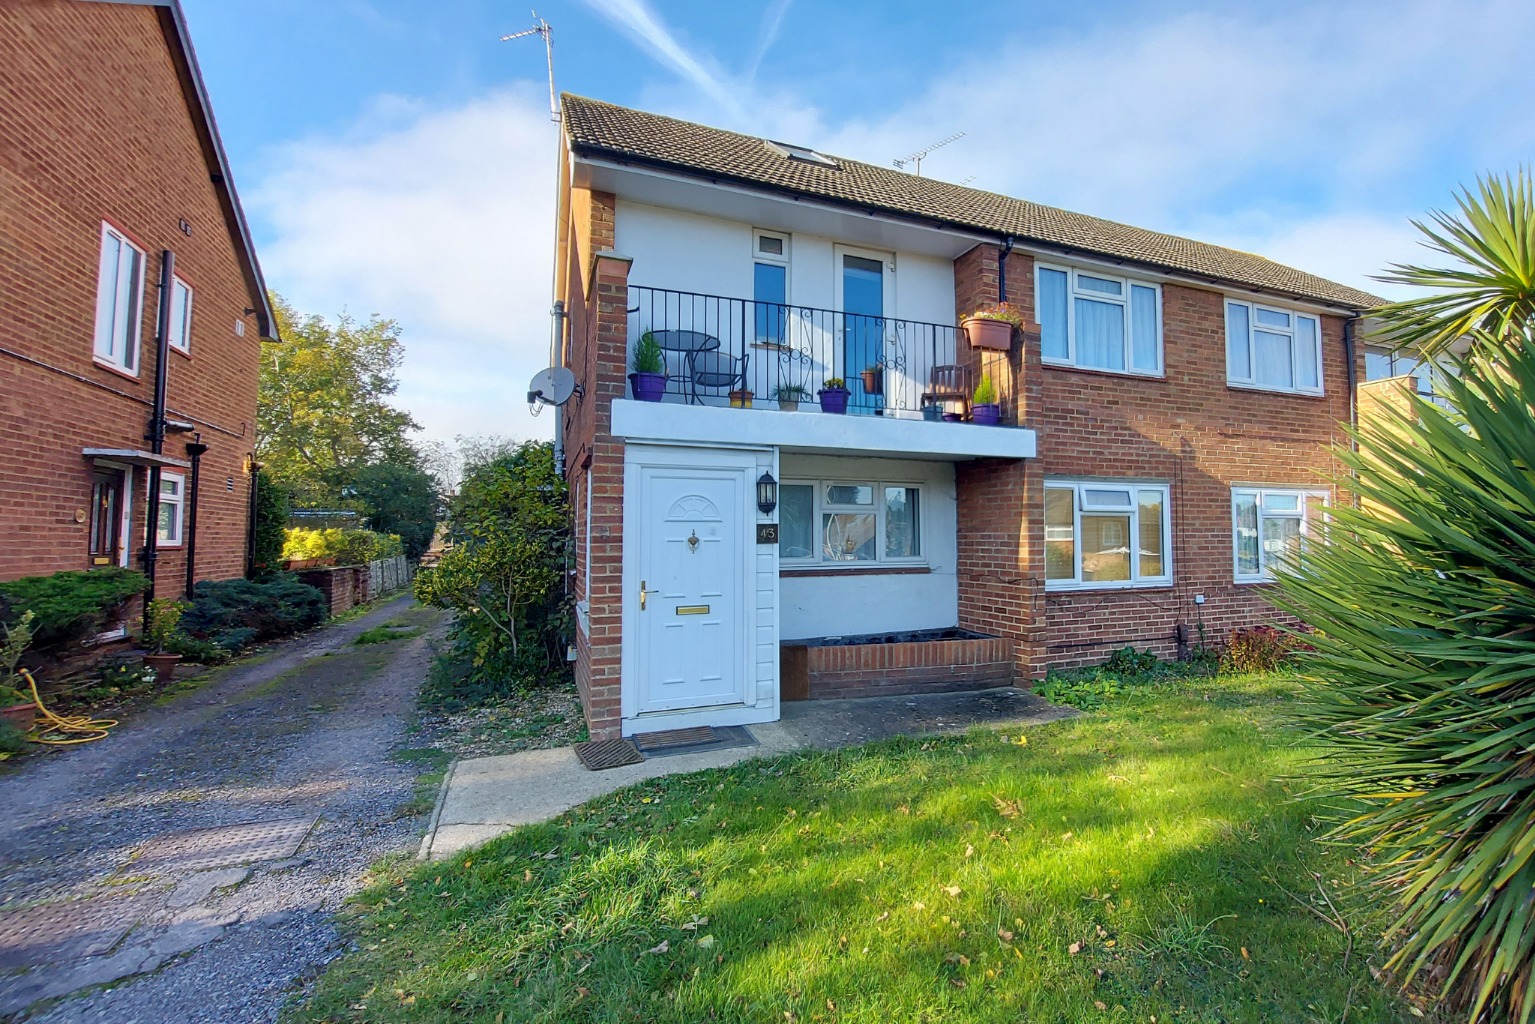 This spacious three bedroom maisonette just minutes from local shops is something that doesn't come onto the market very often. This home would make an ideal first time or investment purchase and has so much to offer.